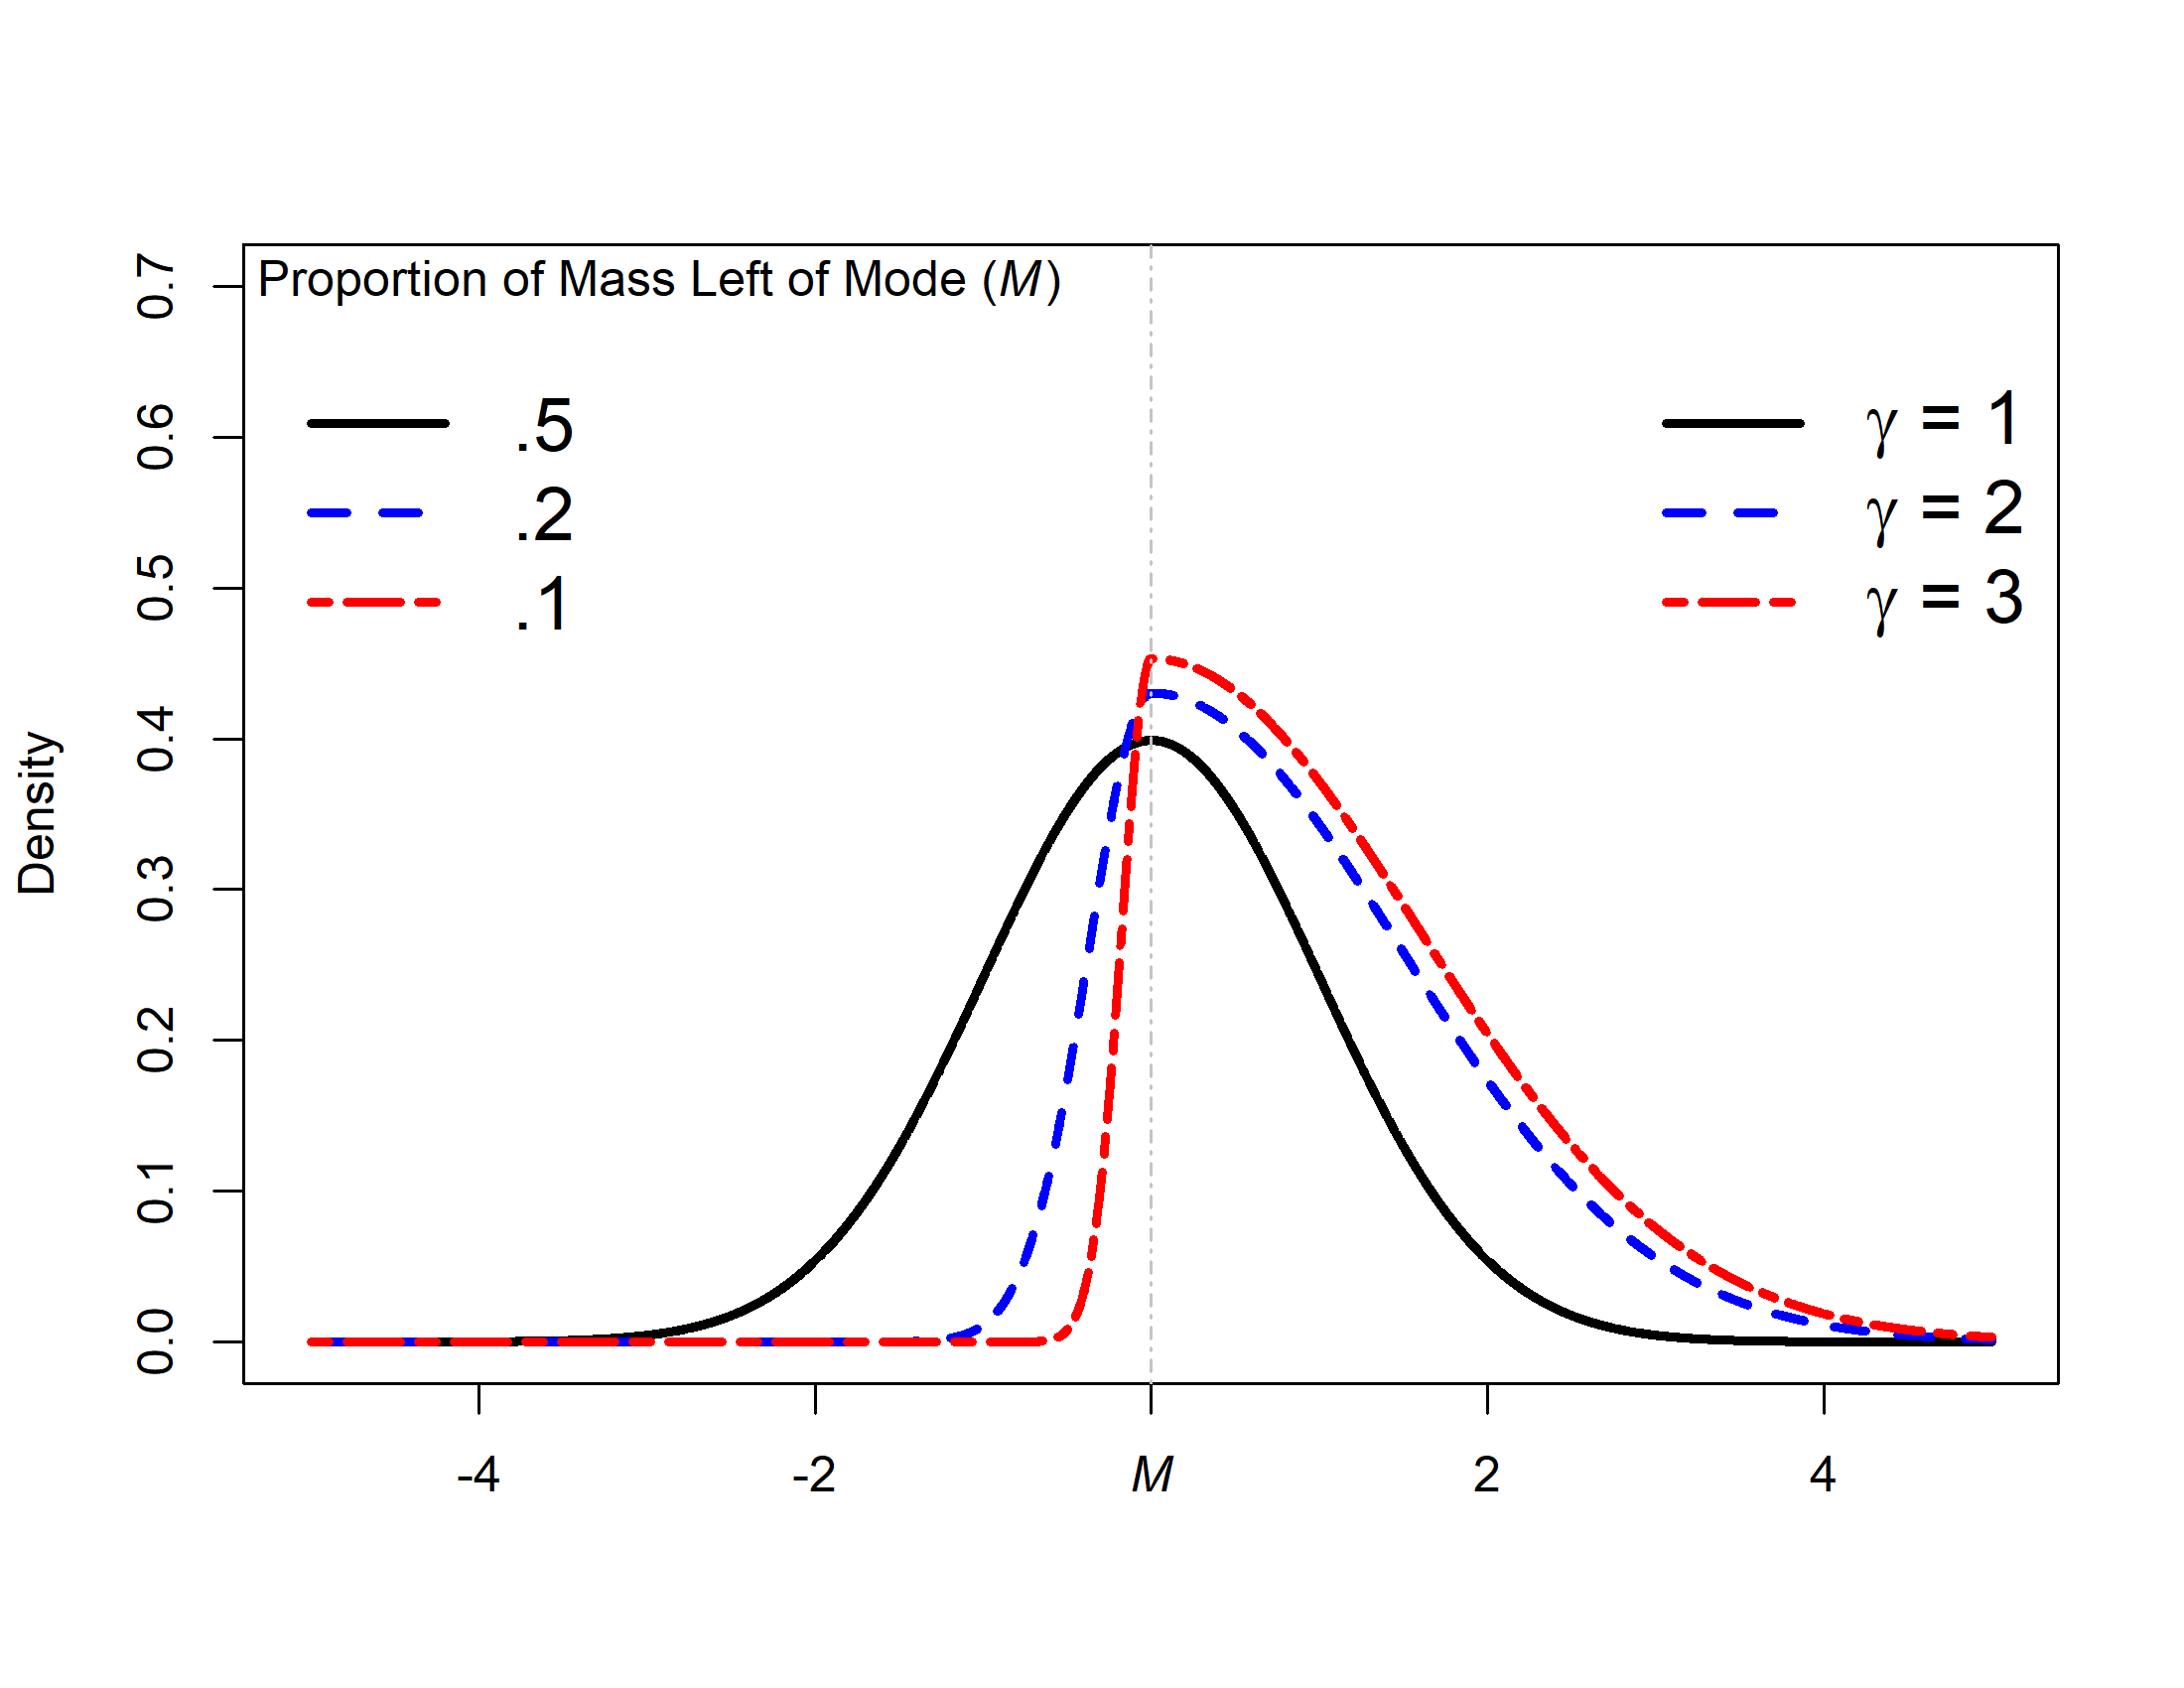 Example of the influence of shape parameter $\gamma$ on the allocation of mass for a normal distribution with a variance of 1.